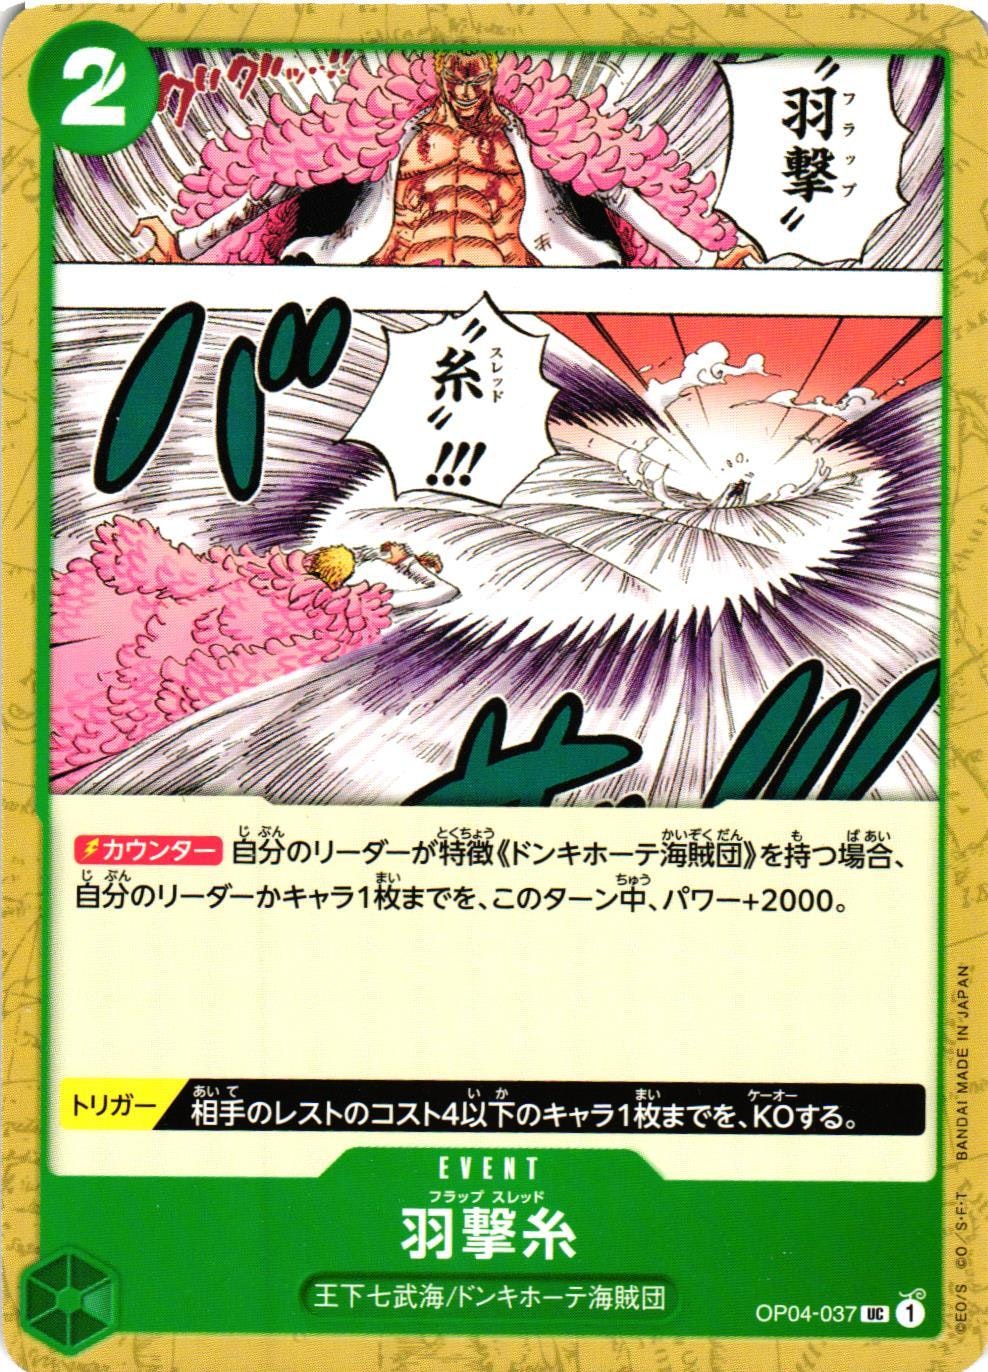 Flapping Thread Uncommon OP04-037 Kingdoms of Intrigue One Piece